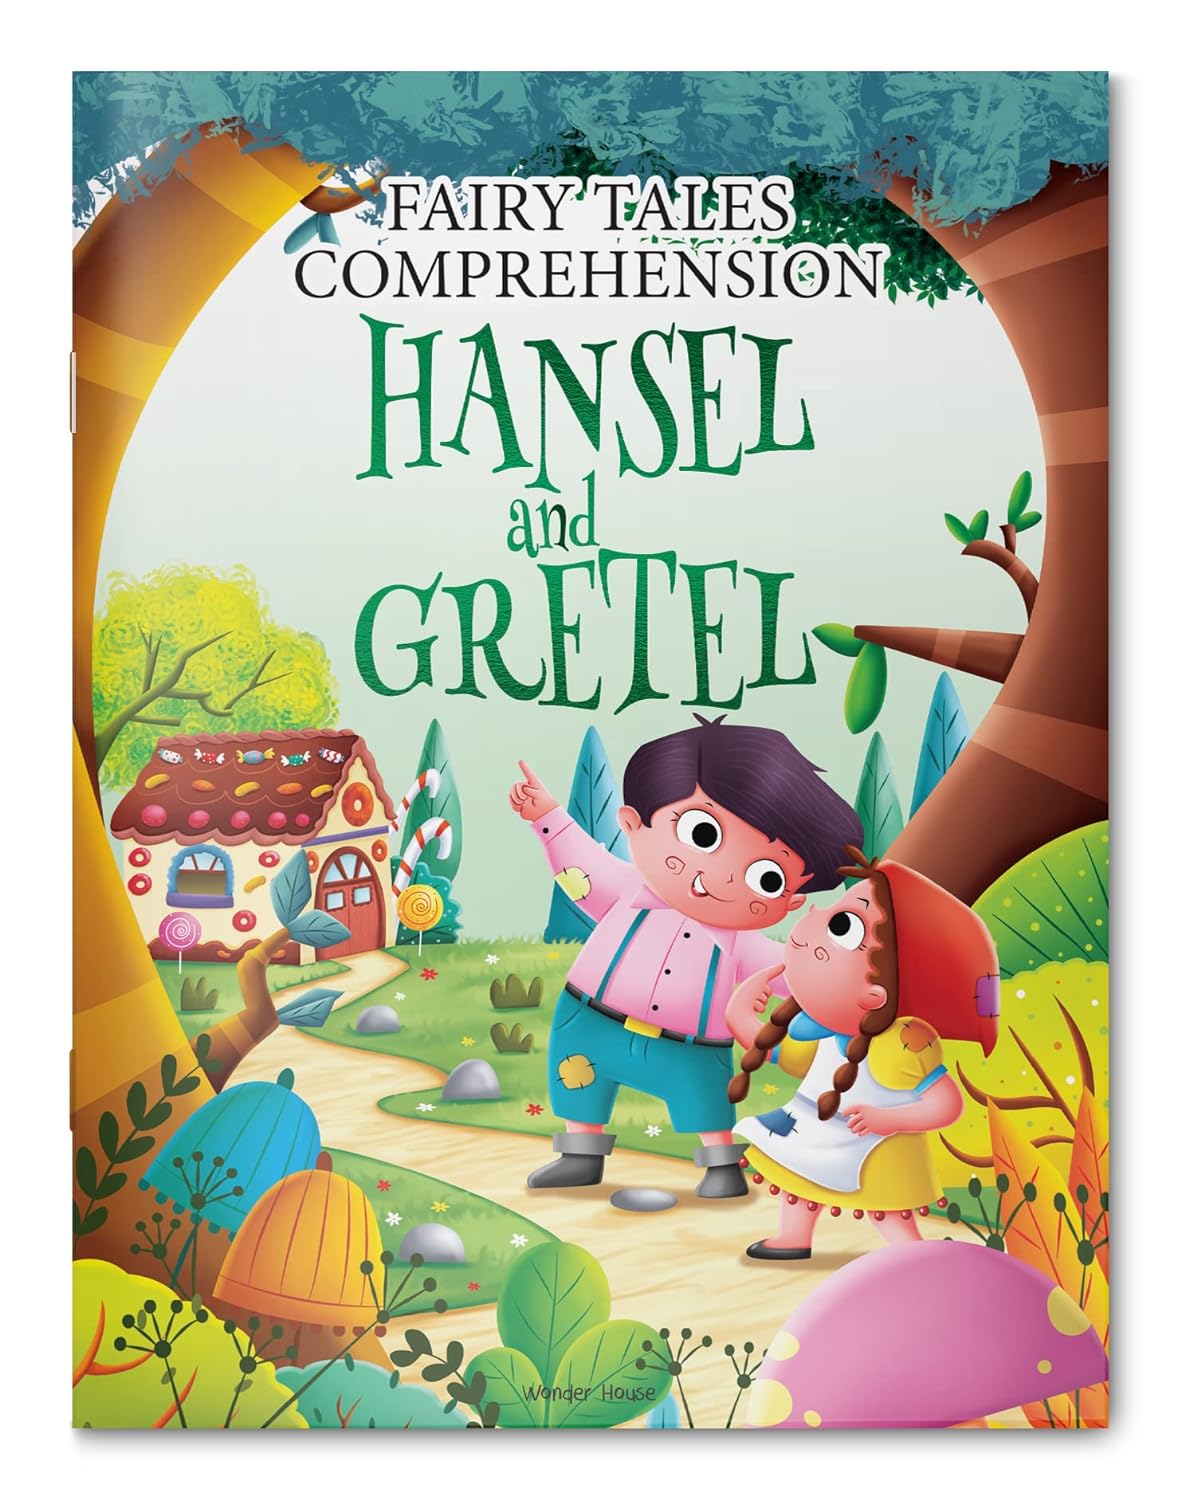 Fairy Tales Comprehension: Hansel and Gretel